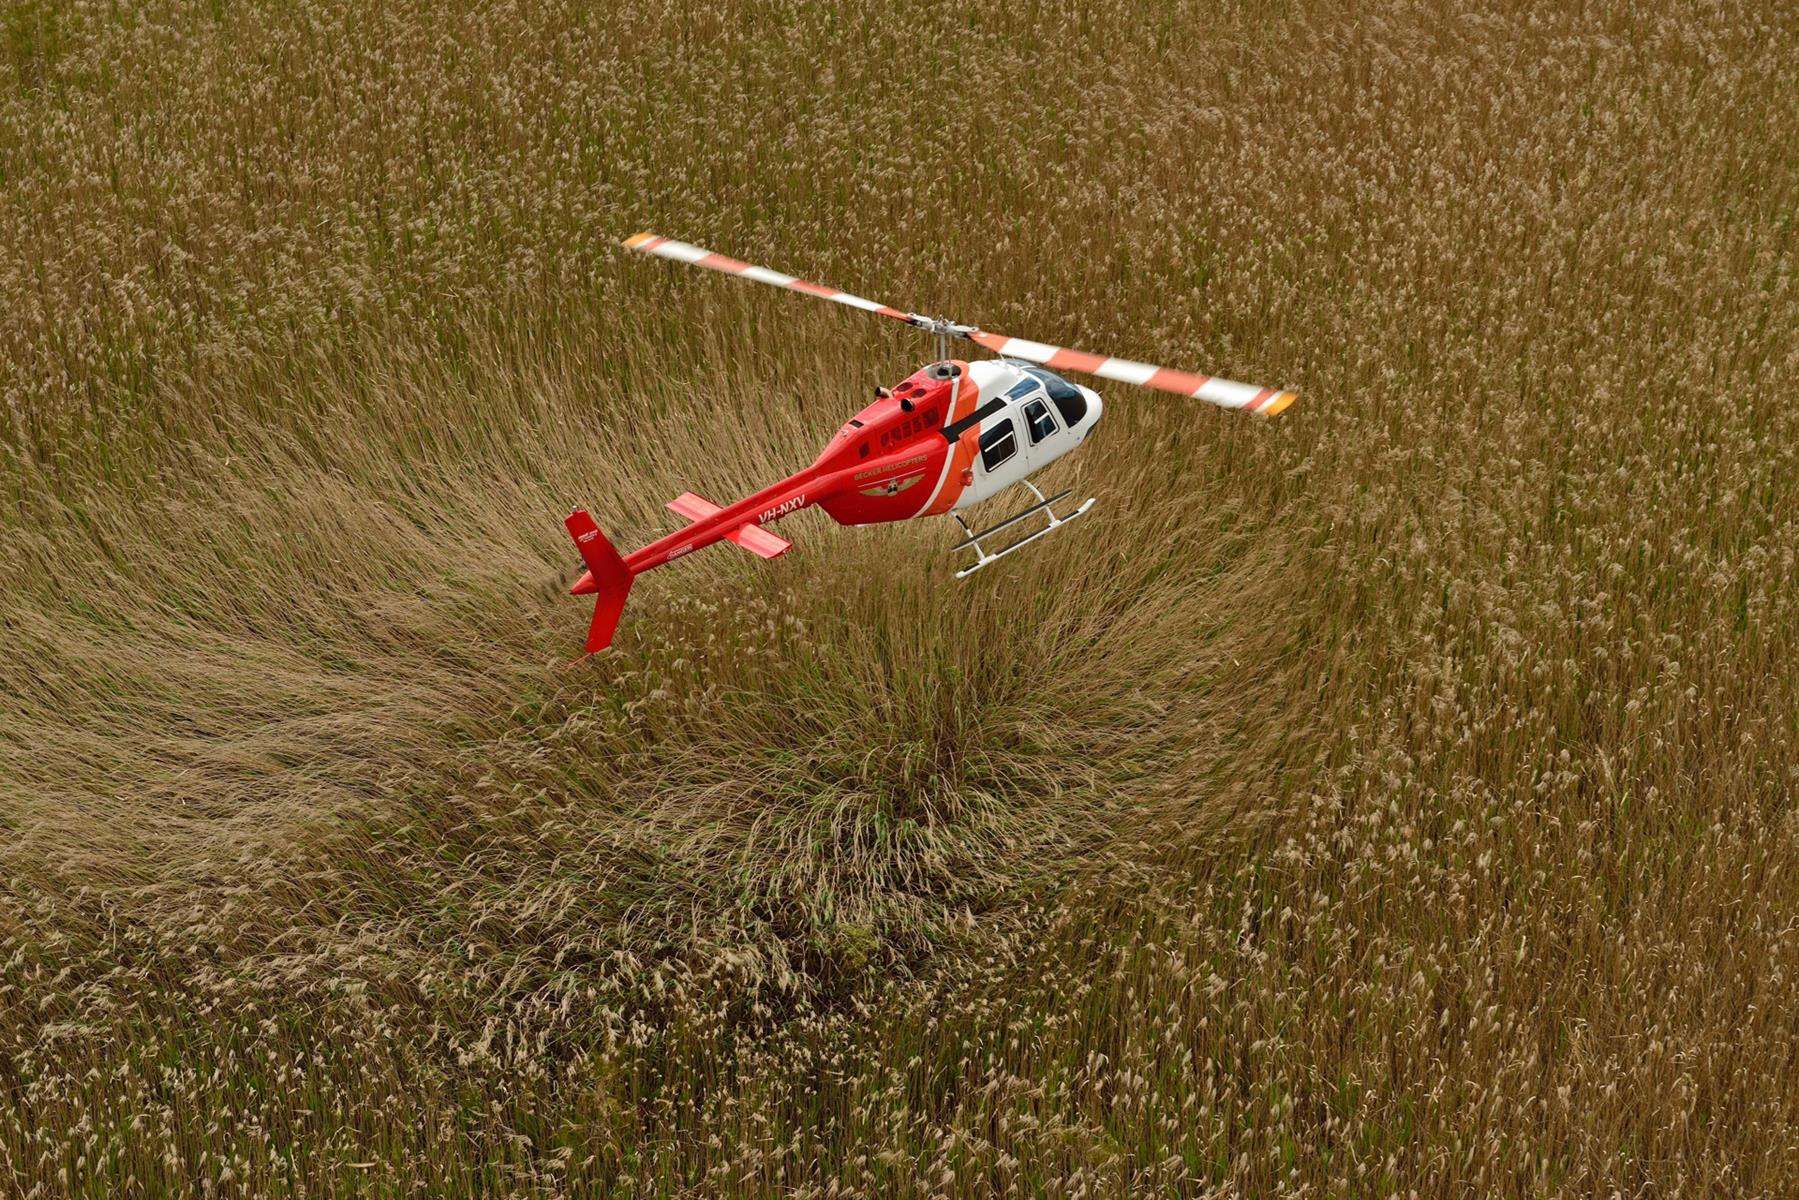 Helicopter Hovering over Long Grass